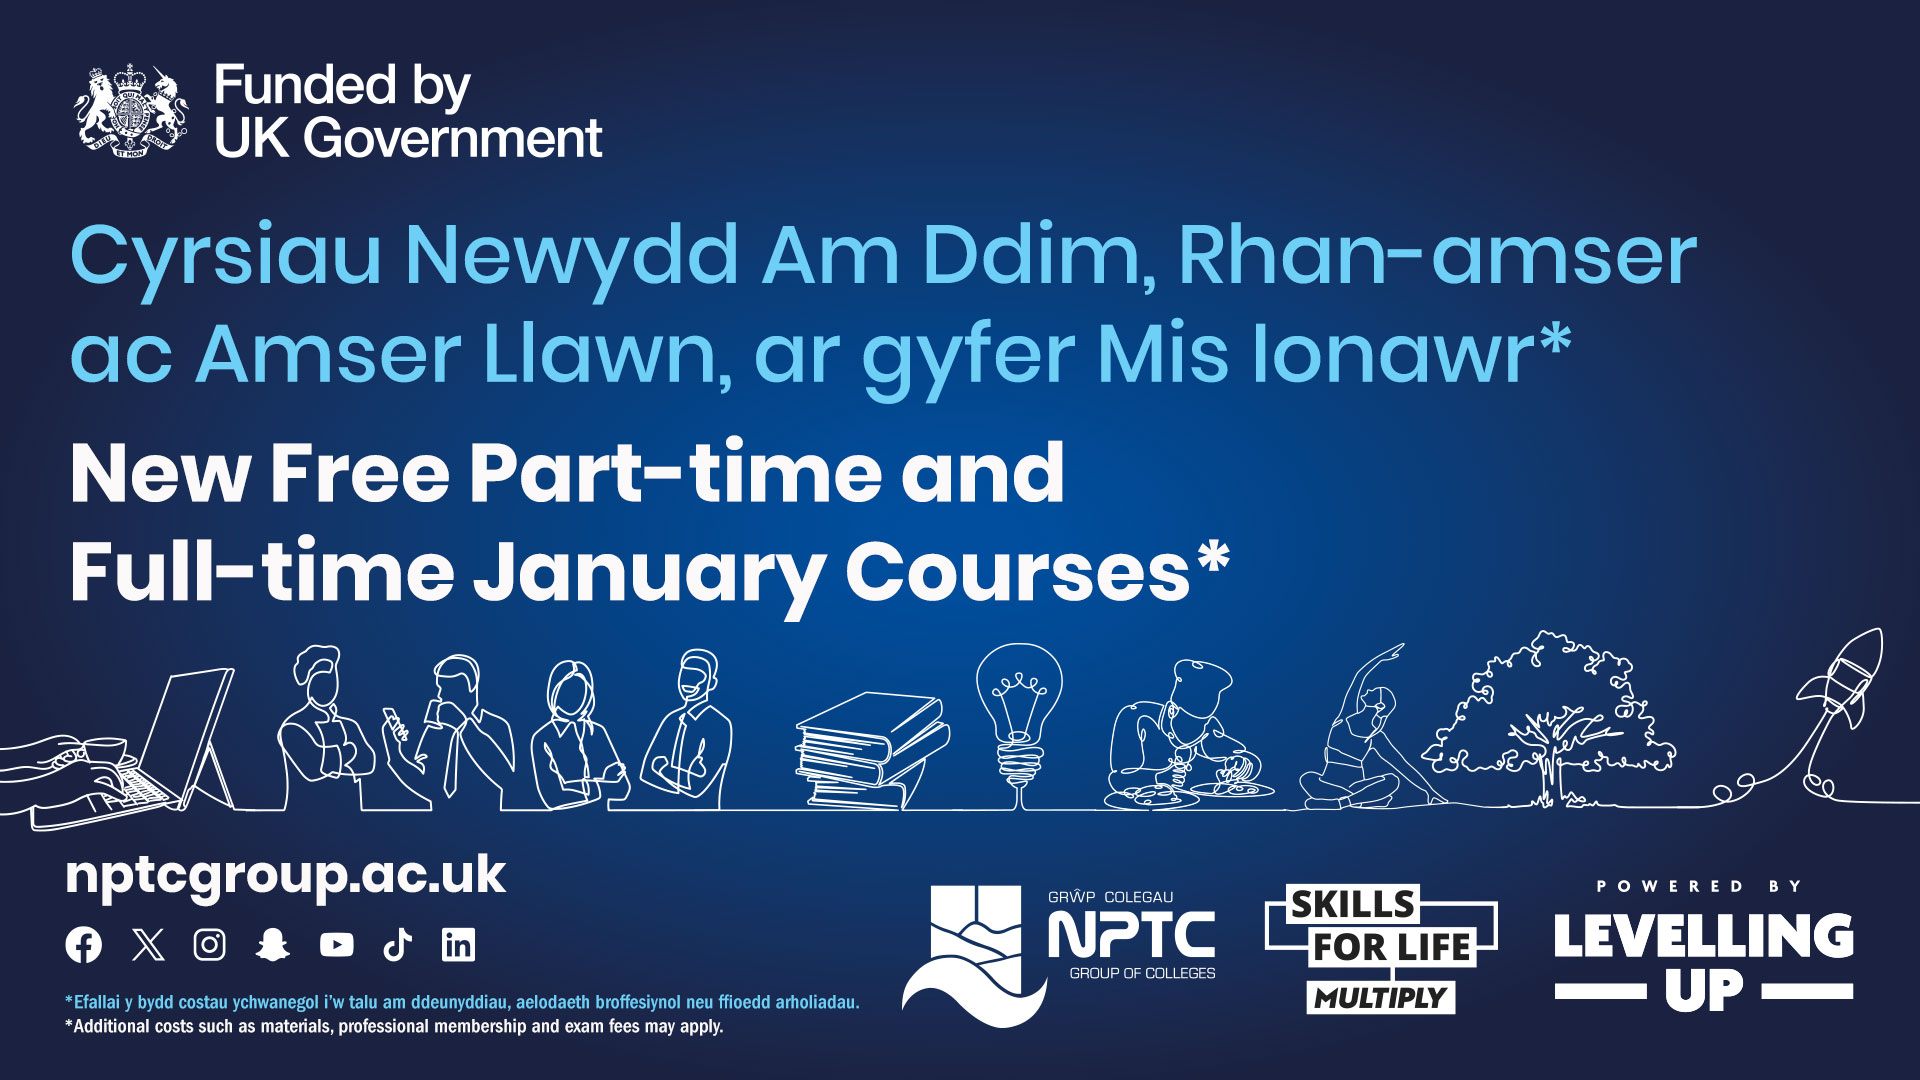 Blue infographic with text reading "New Free Part-Time and Full-Time January Courses" in Welsh and English.